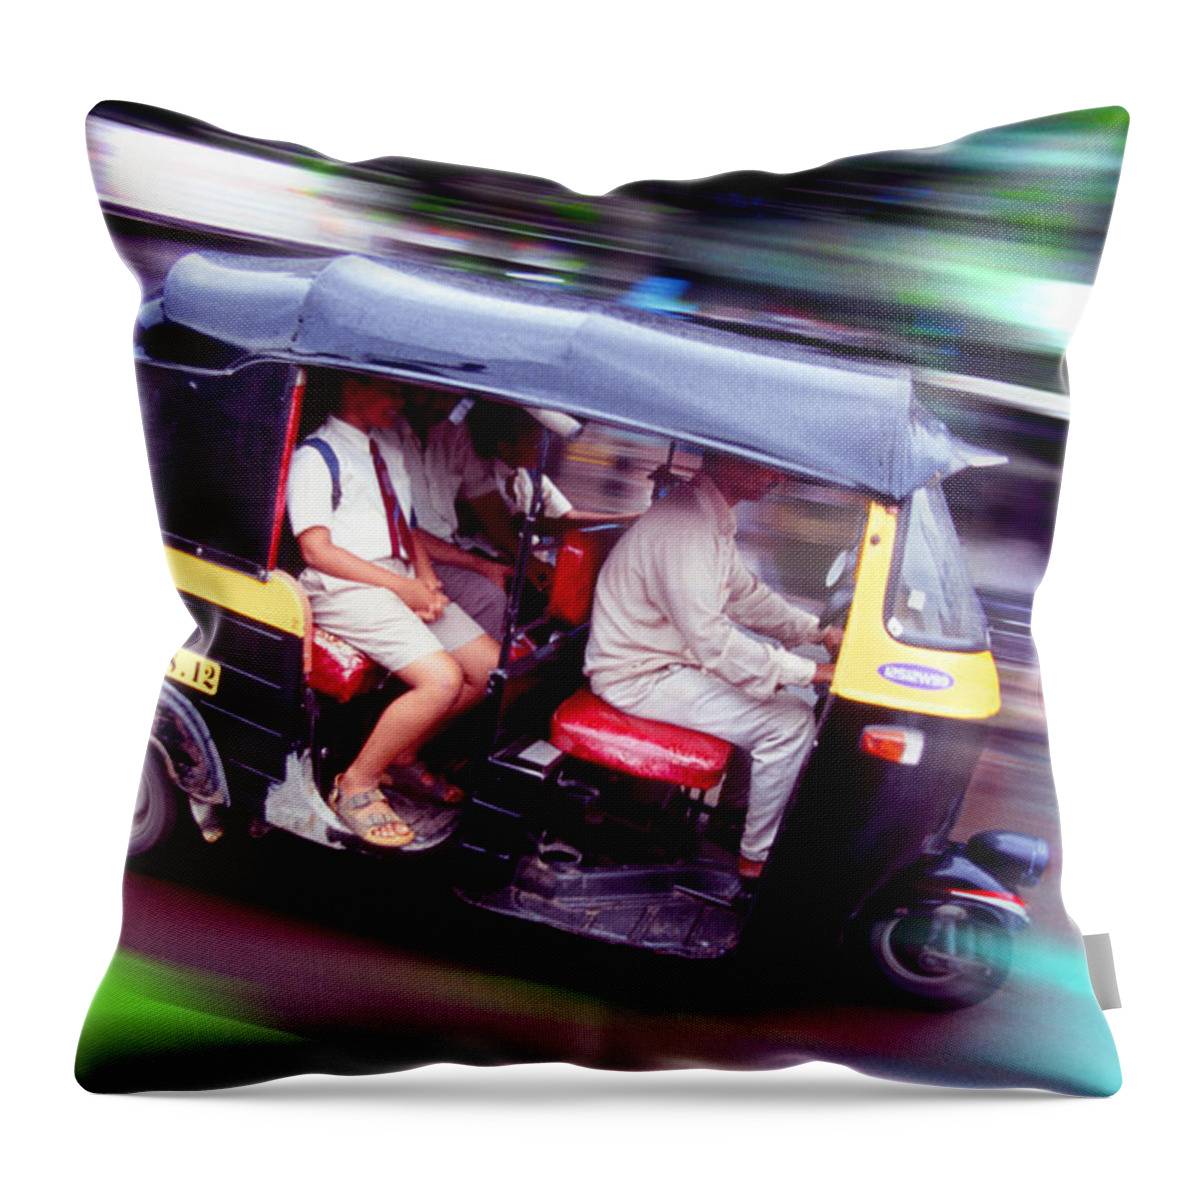 Cities Throw Pillow featuring the photograph Tuxi by Richard Piper